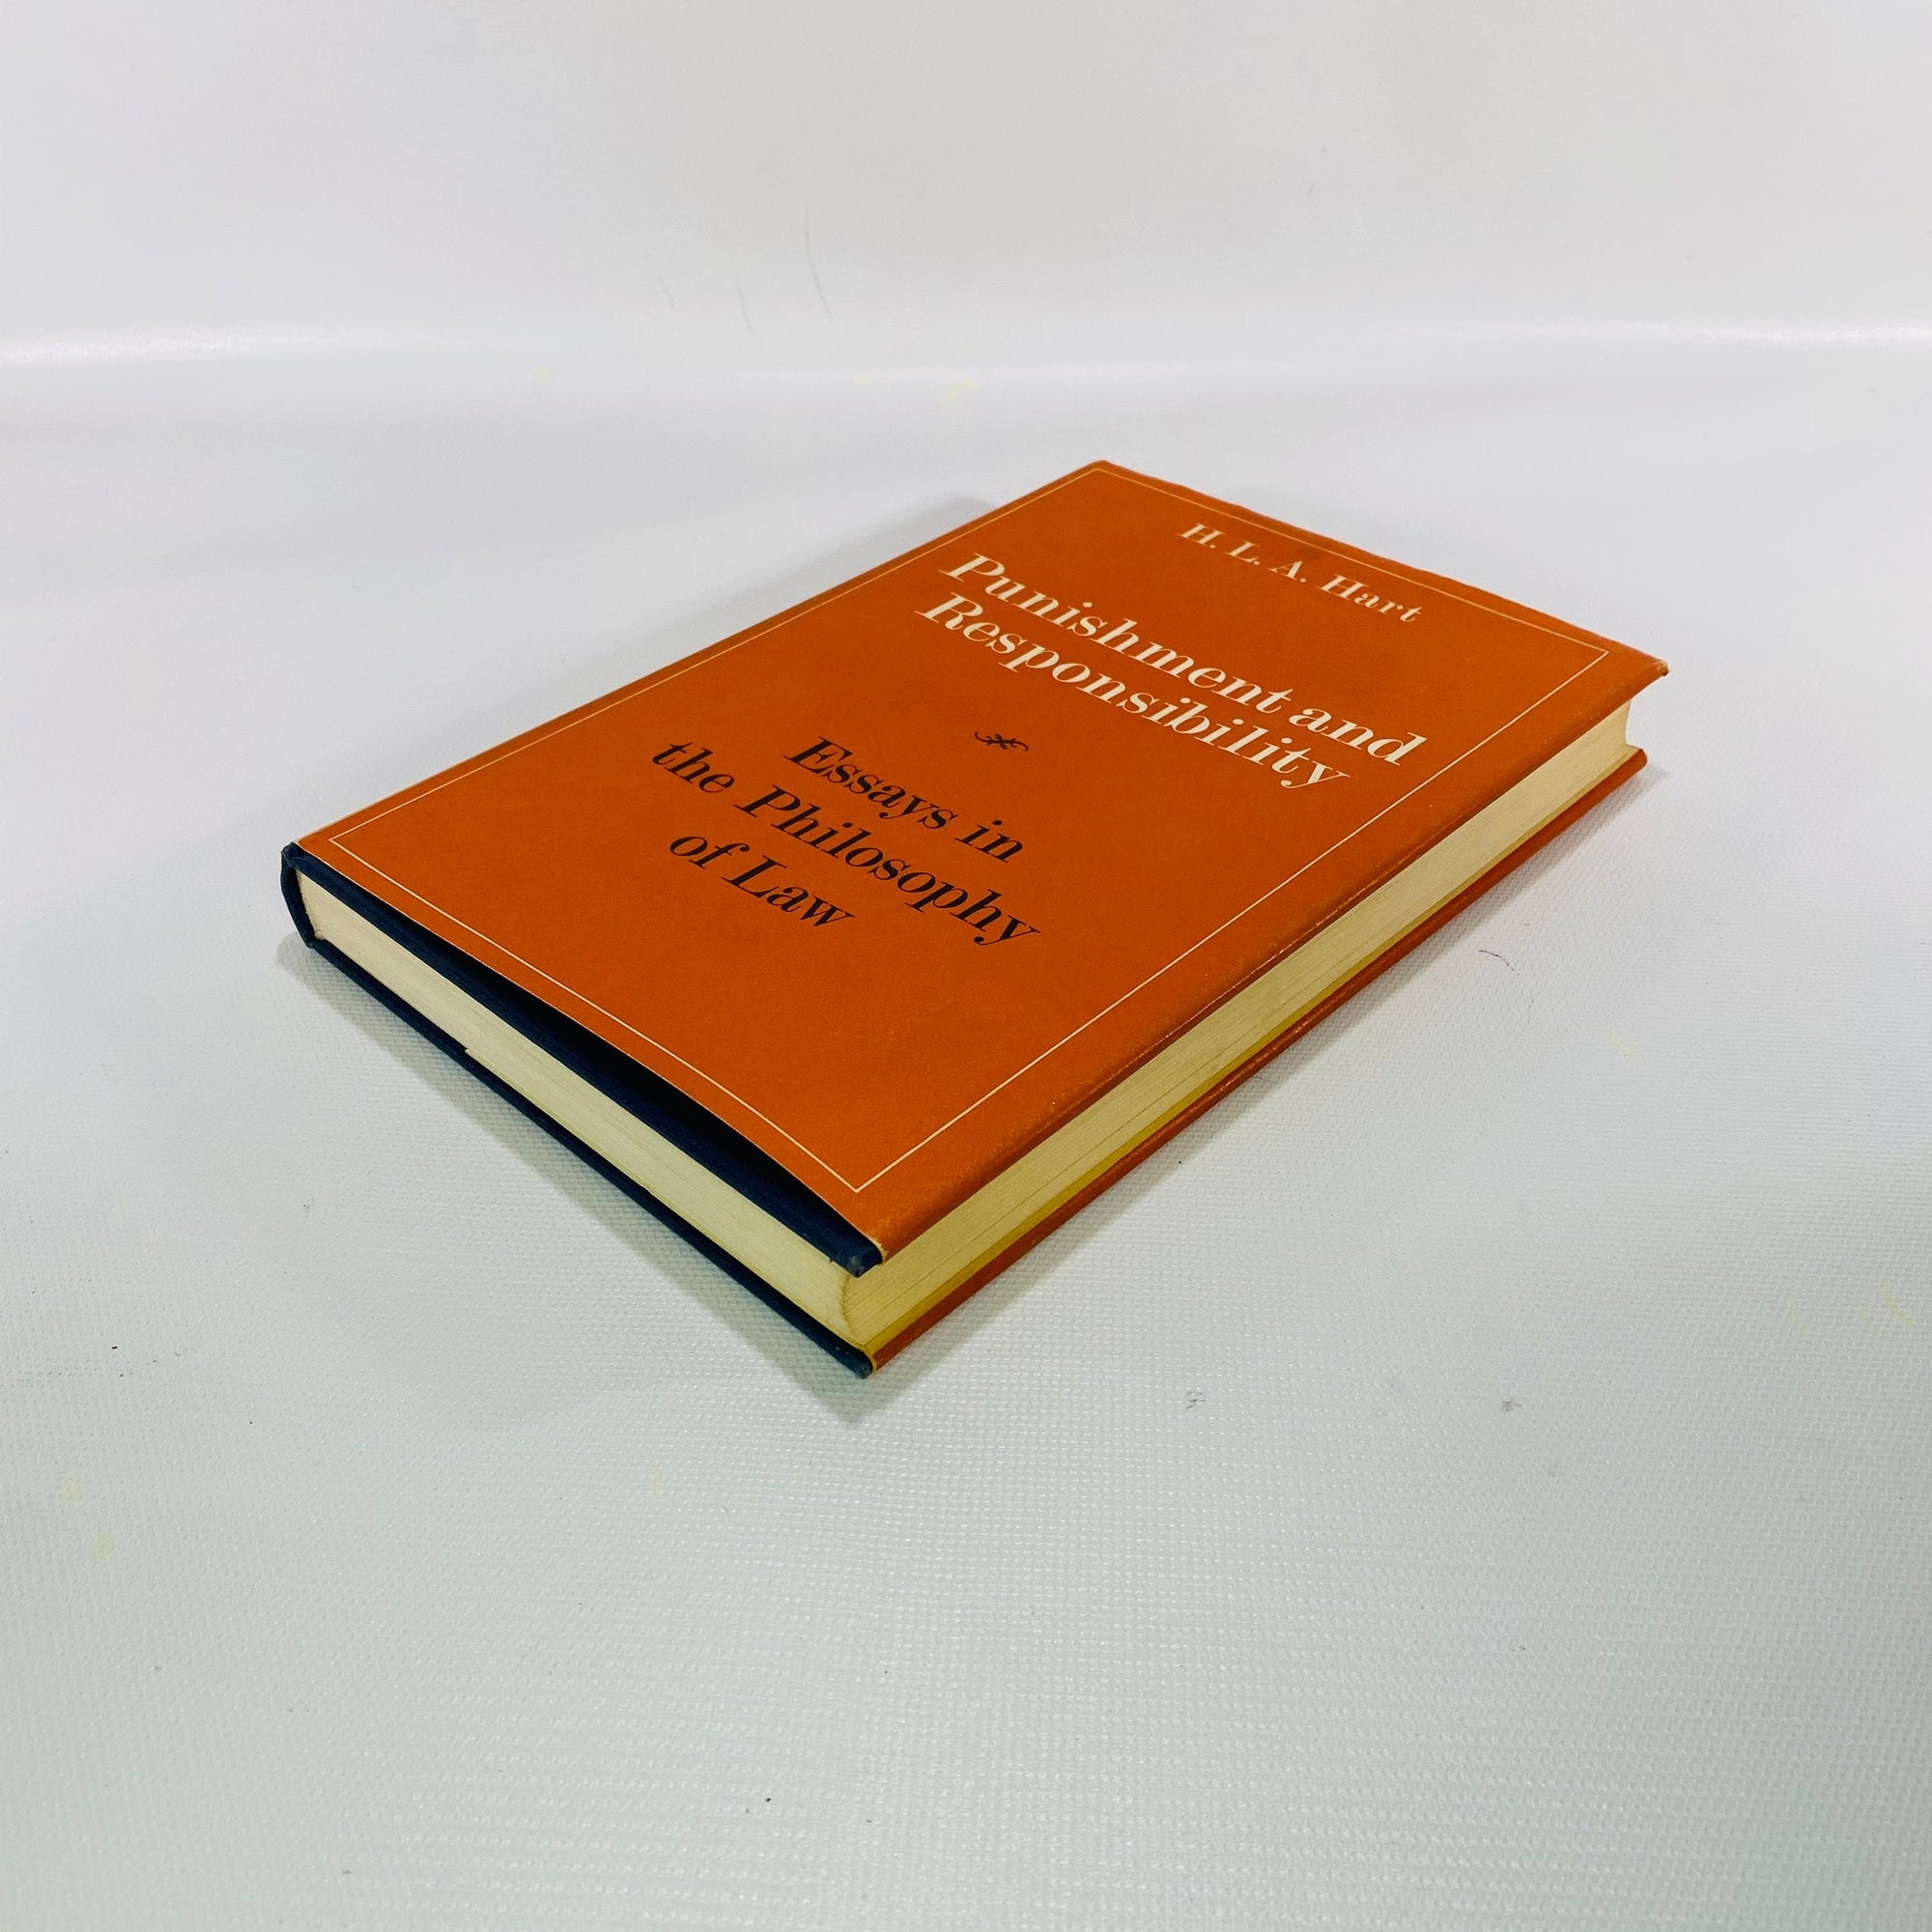 Punishment and Responsibility Essays in the Philosophy of Law by H L Hart First Edition 1968 Vintage Book